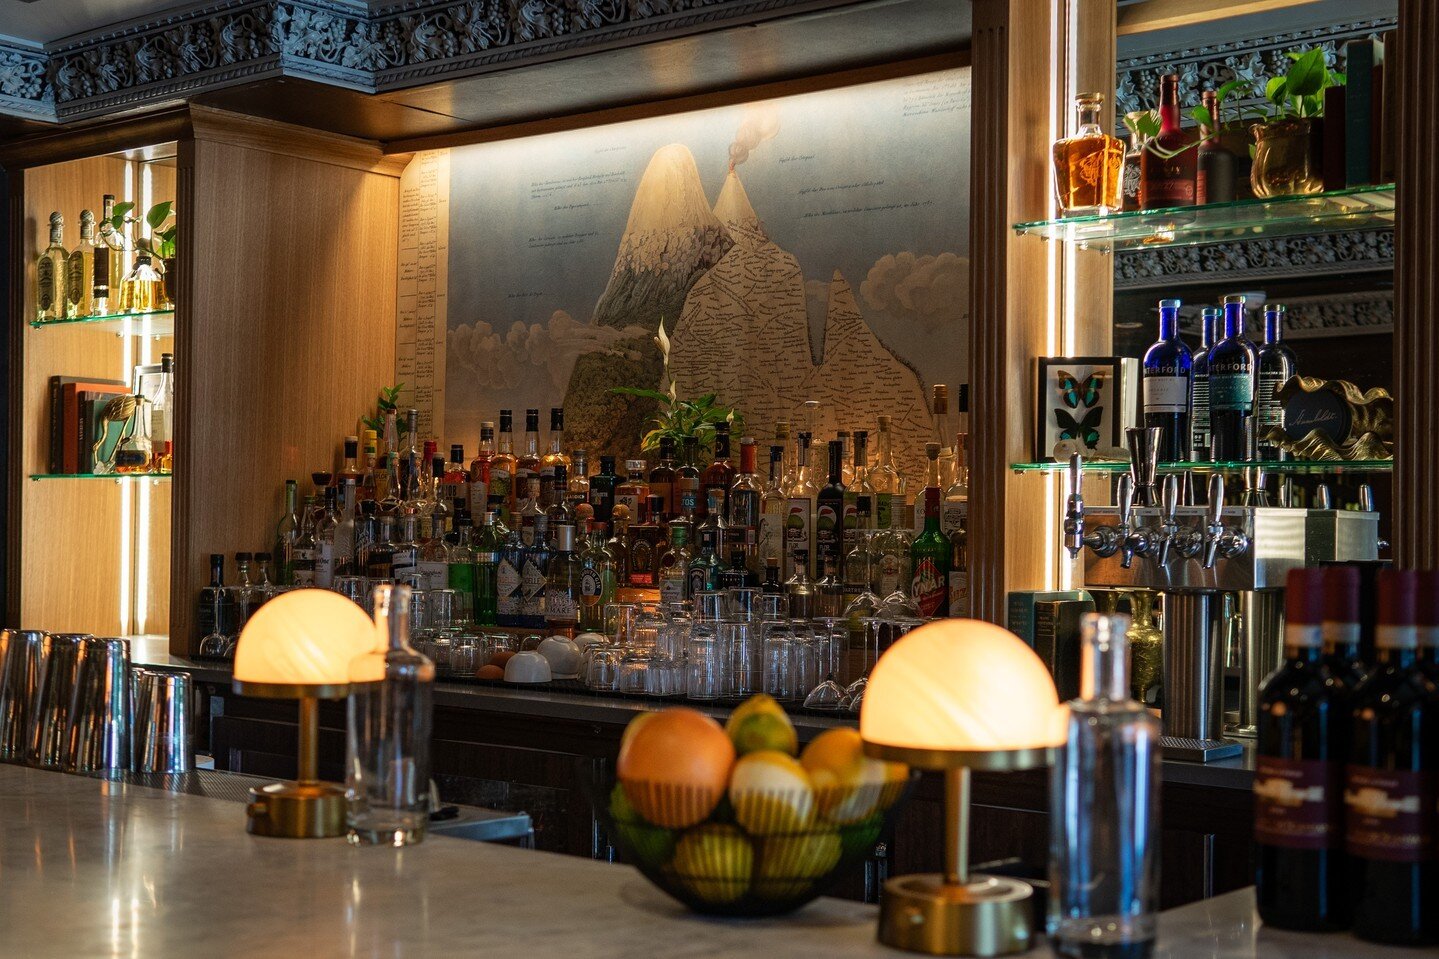 A backbar to make all your cocktail dreams come true! Don't see something you like on our menu? We're happy to make you your favourite classic cocktail or a bespoke creation with our extensive collection of premium spirits. 🍸

Open all weekend~
Wed/